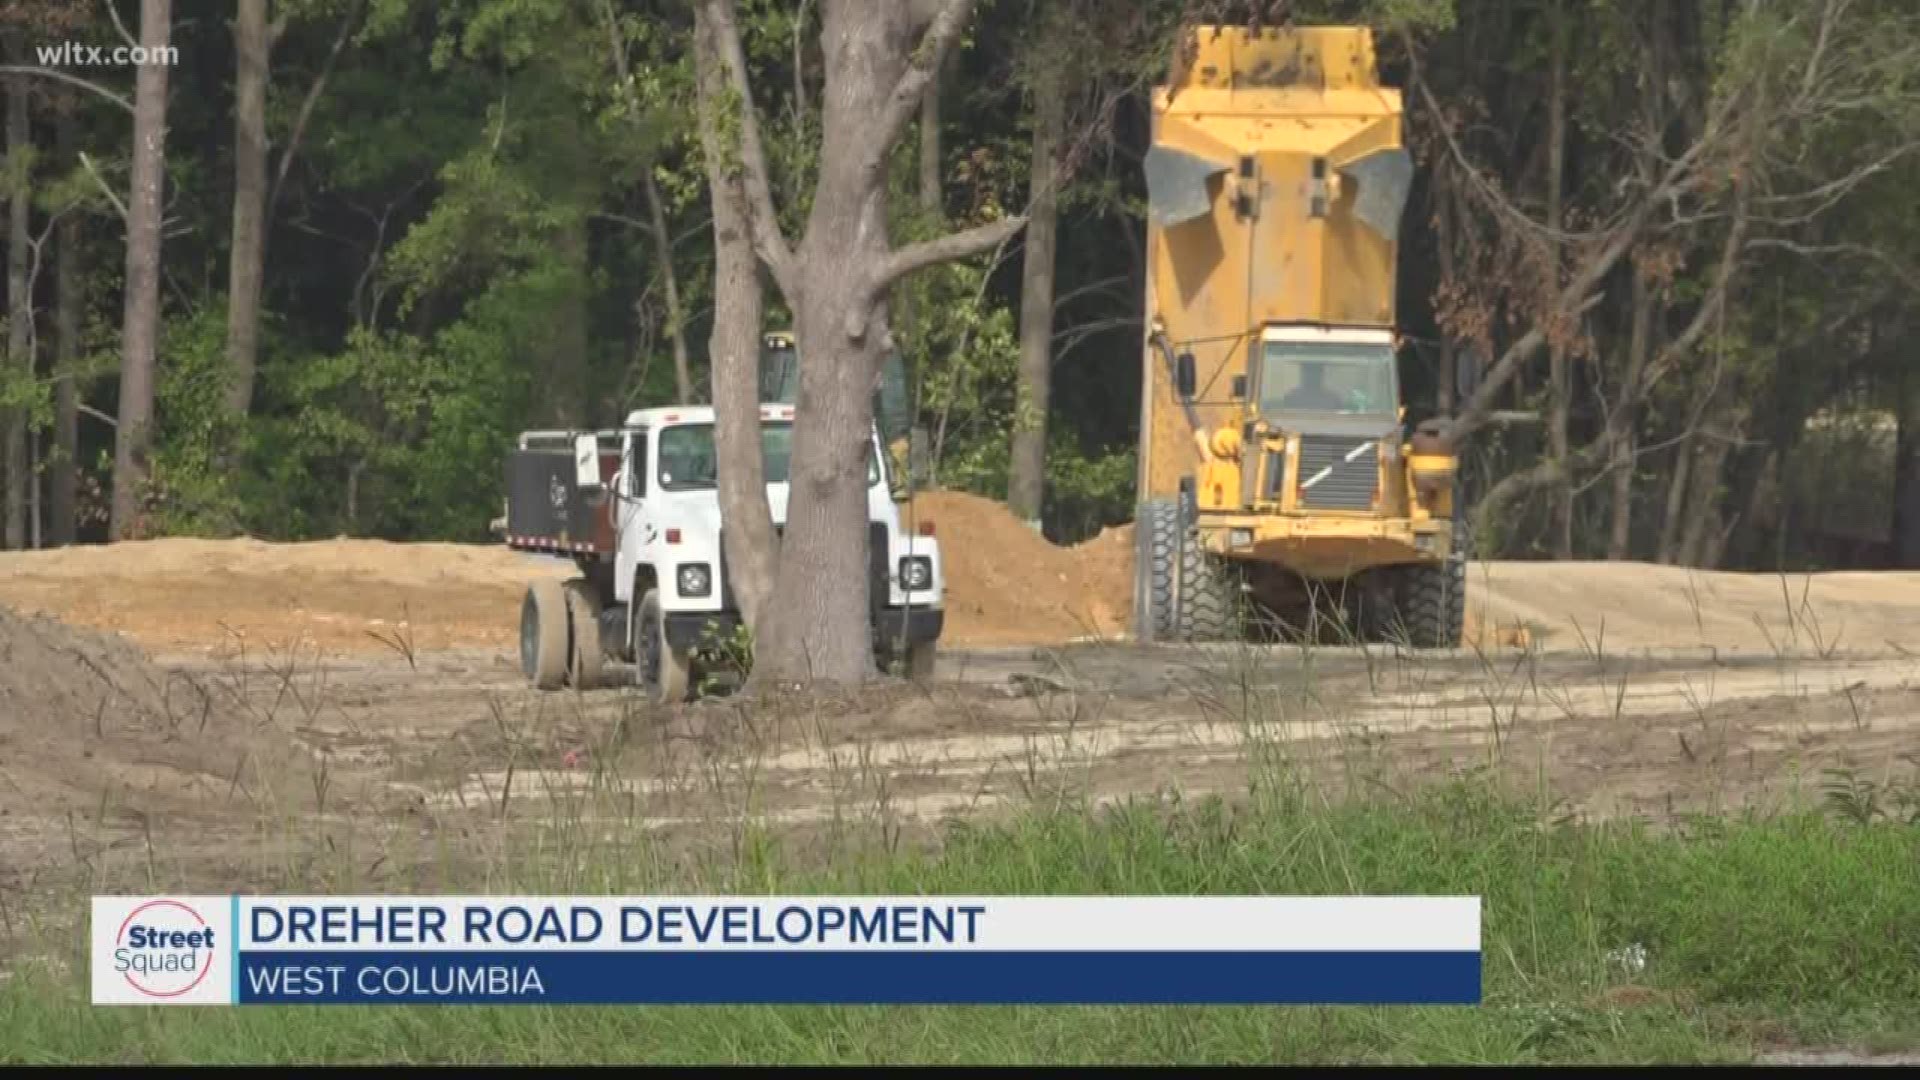 The 120 townhome development will be located behind the Hobby Lobby in West Columbia off Dreher road.